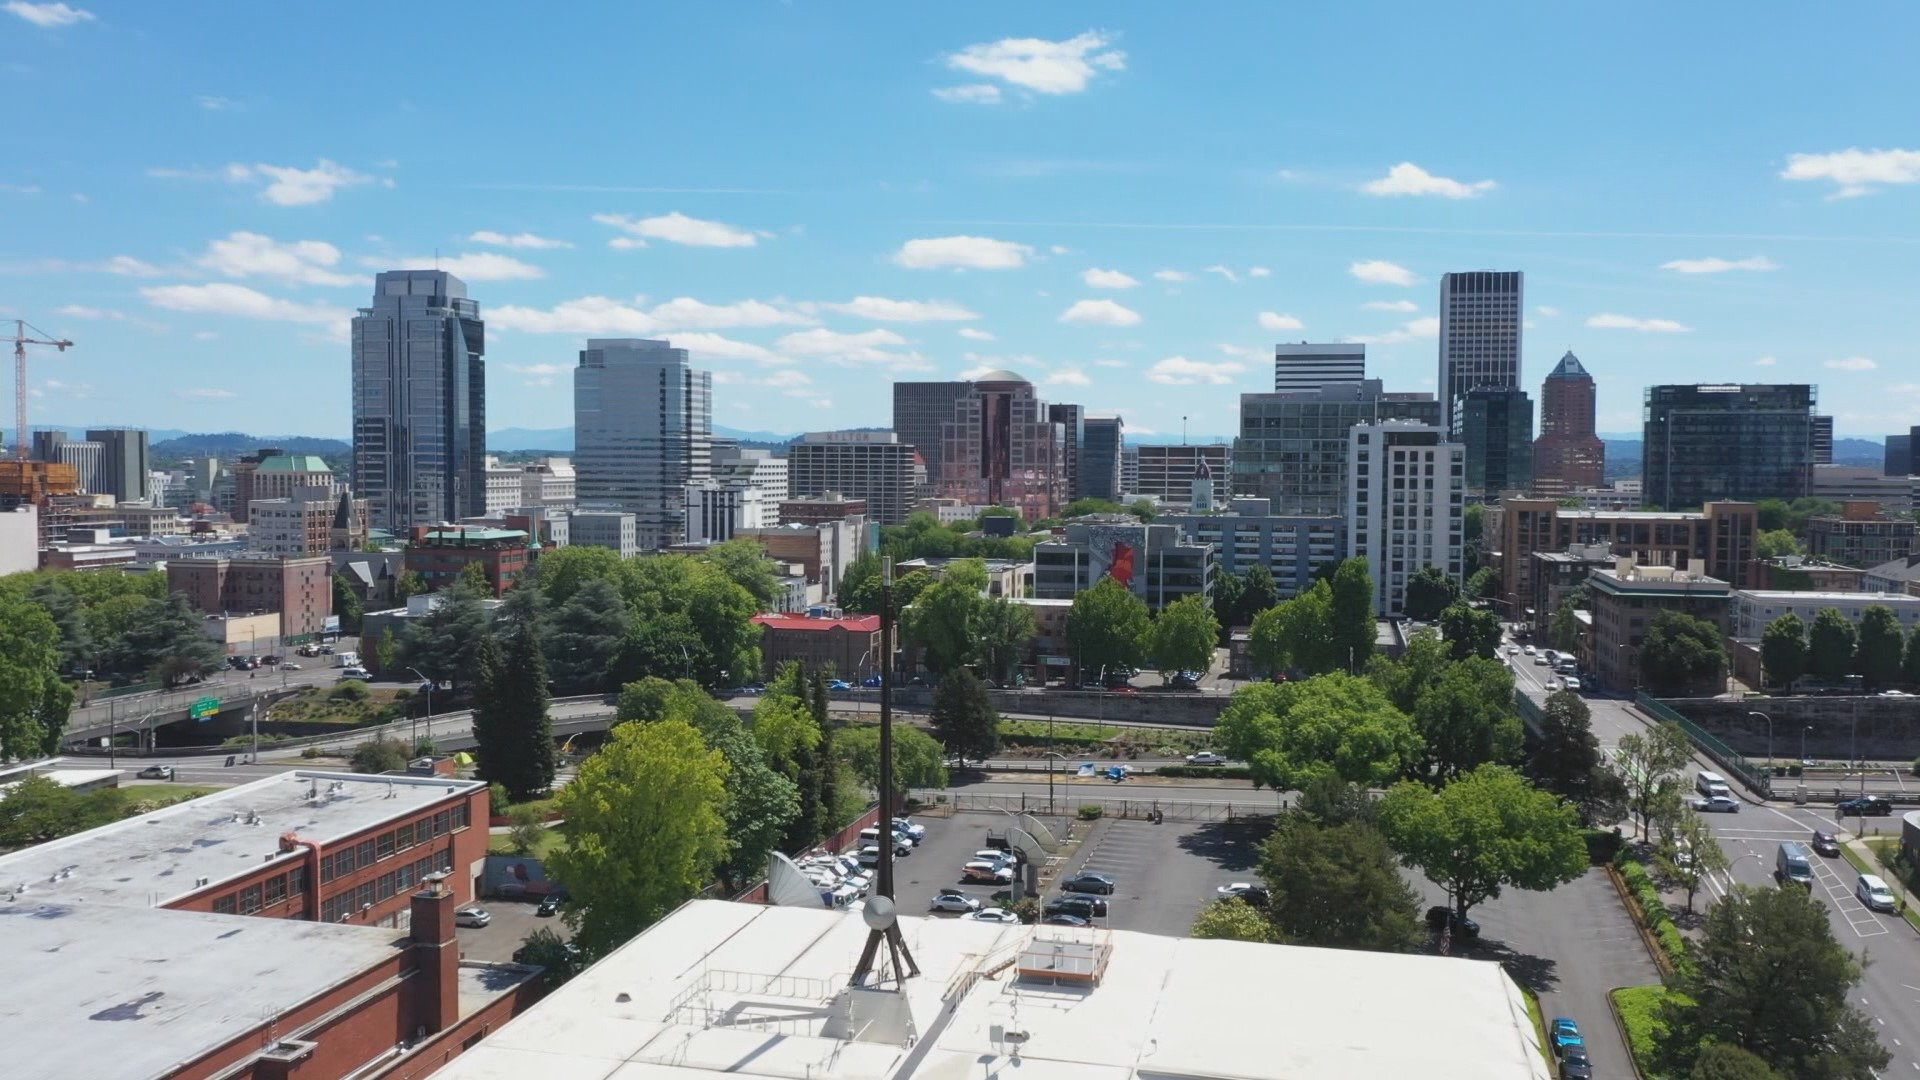 According to a new study from Zillow, the income needed to comfortably afford a home in the Portland metro area is $161,624. That's up about $65,664 from 2020.